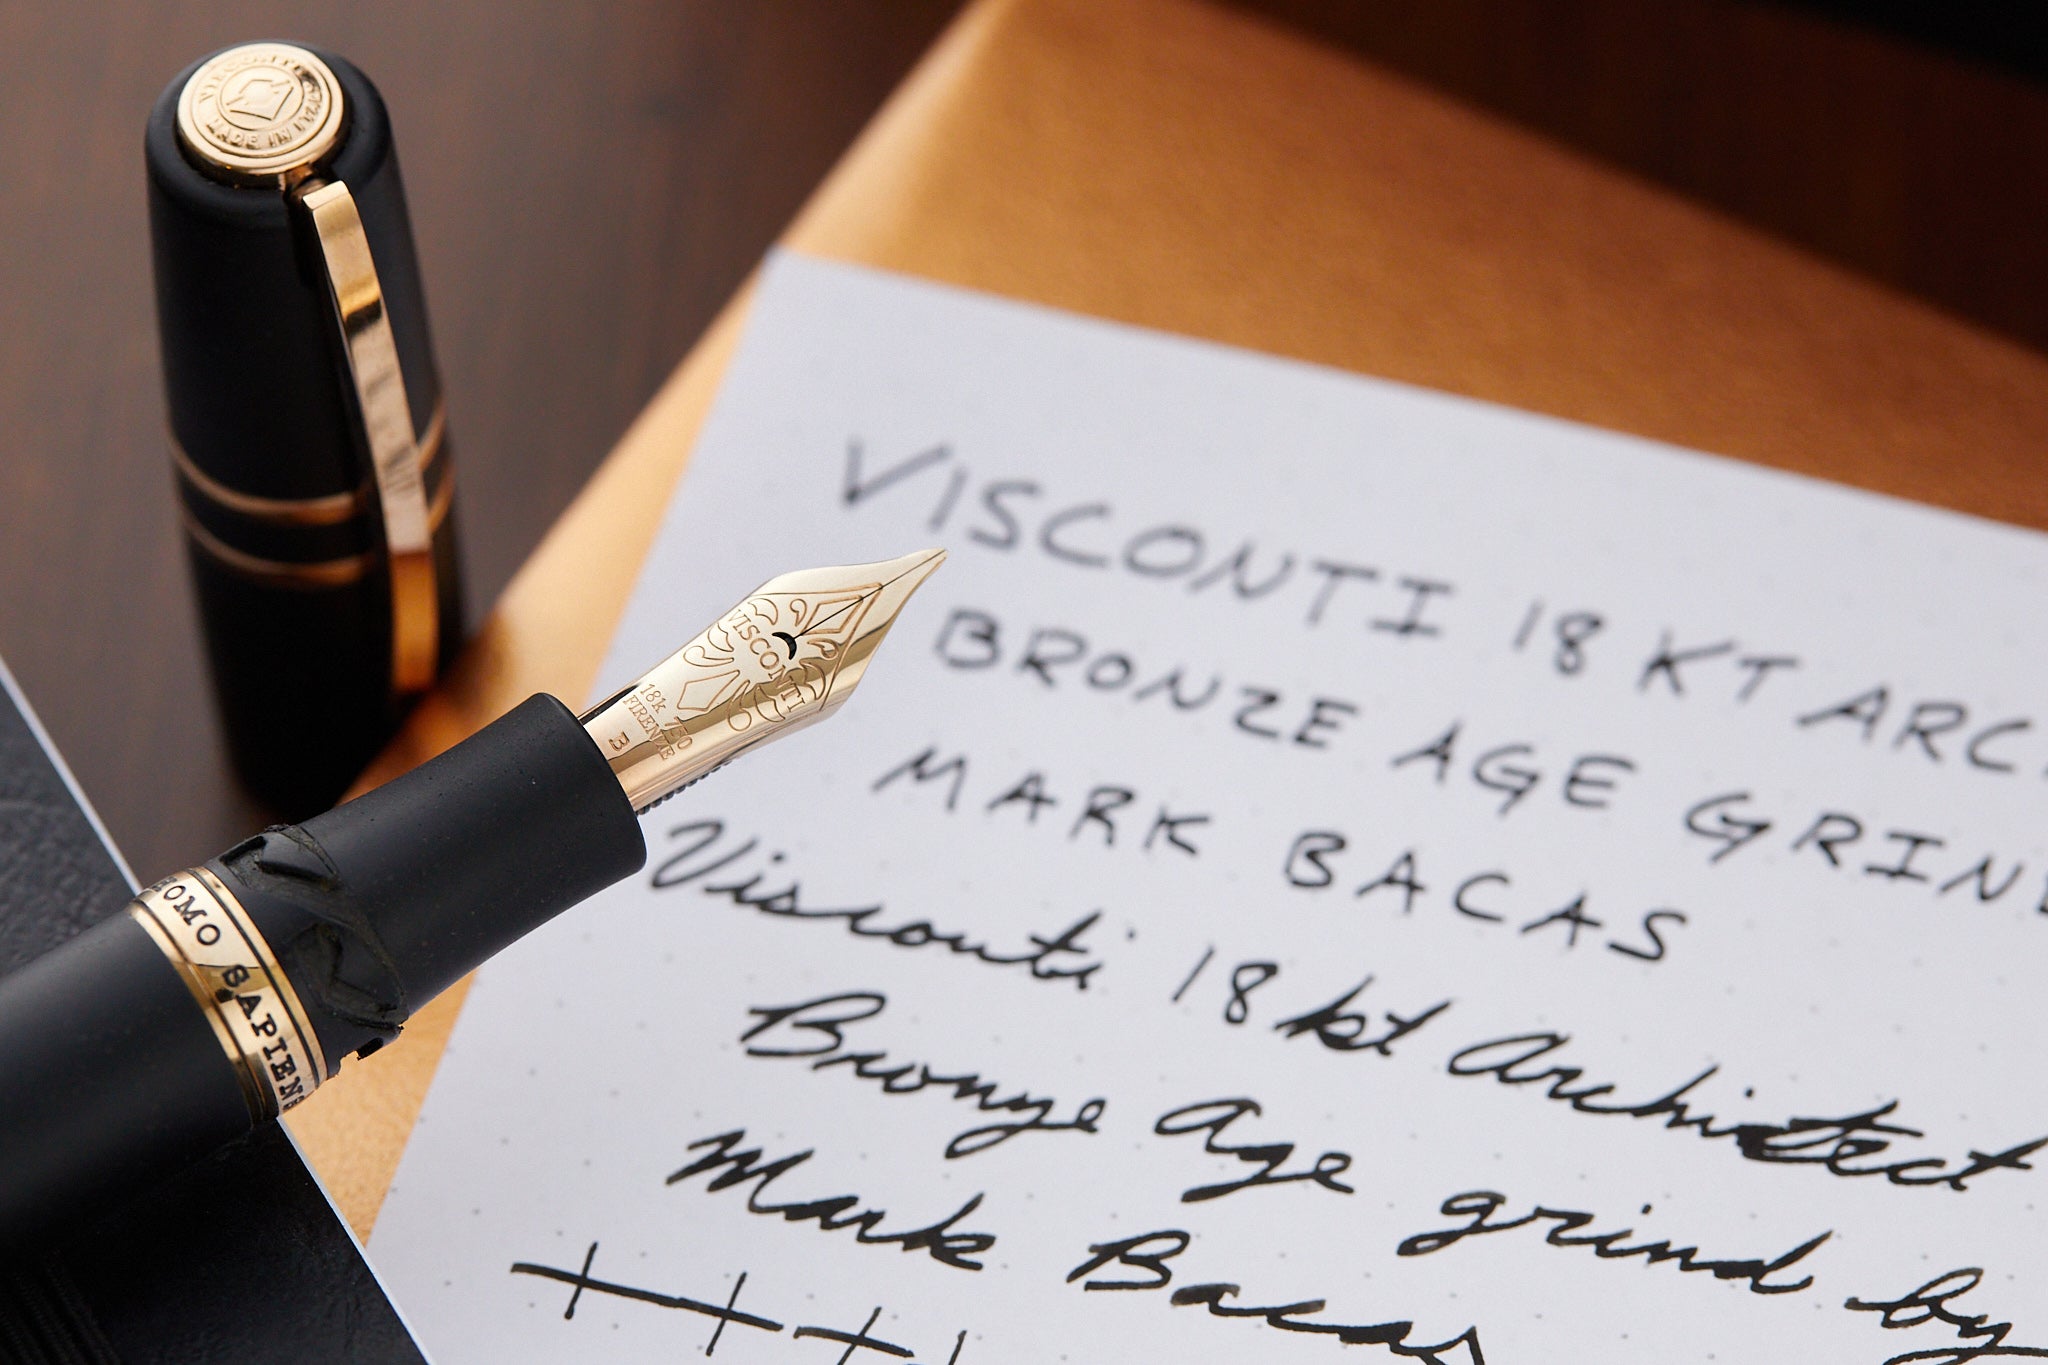 Visconti Homo Sapiens fountain pen with architect nib grind and writing samples in background